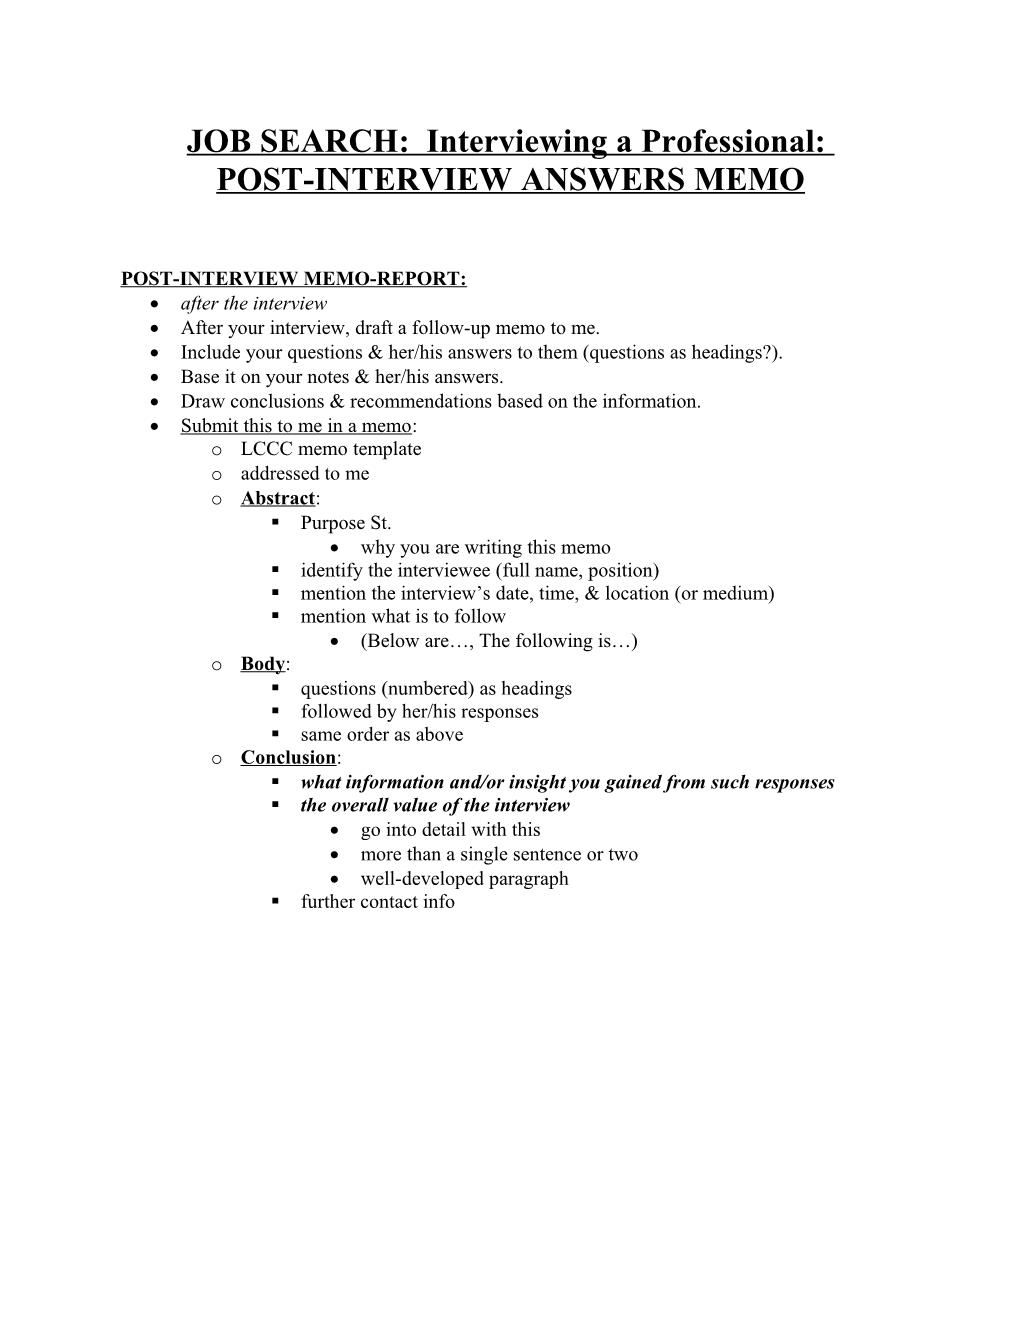 JOB SEARCH: Interviewing a Professional: POST-INTERVIEW MEMO